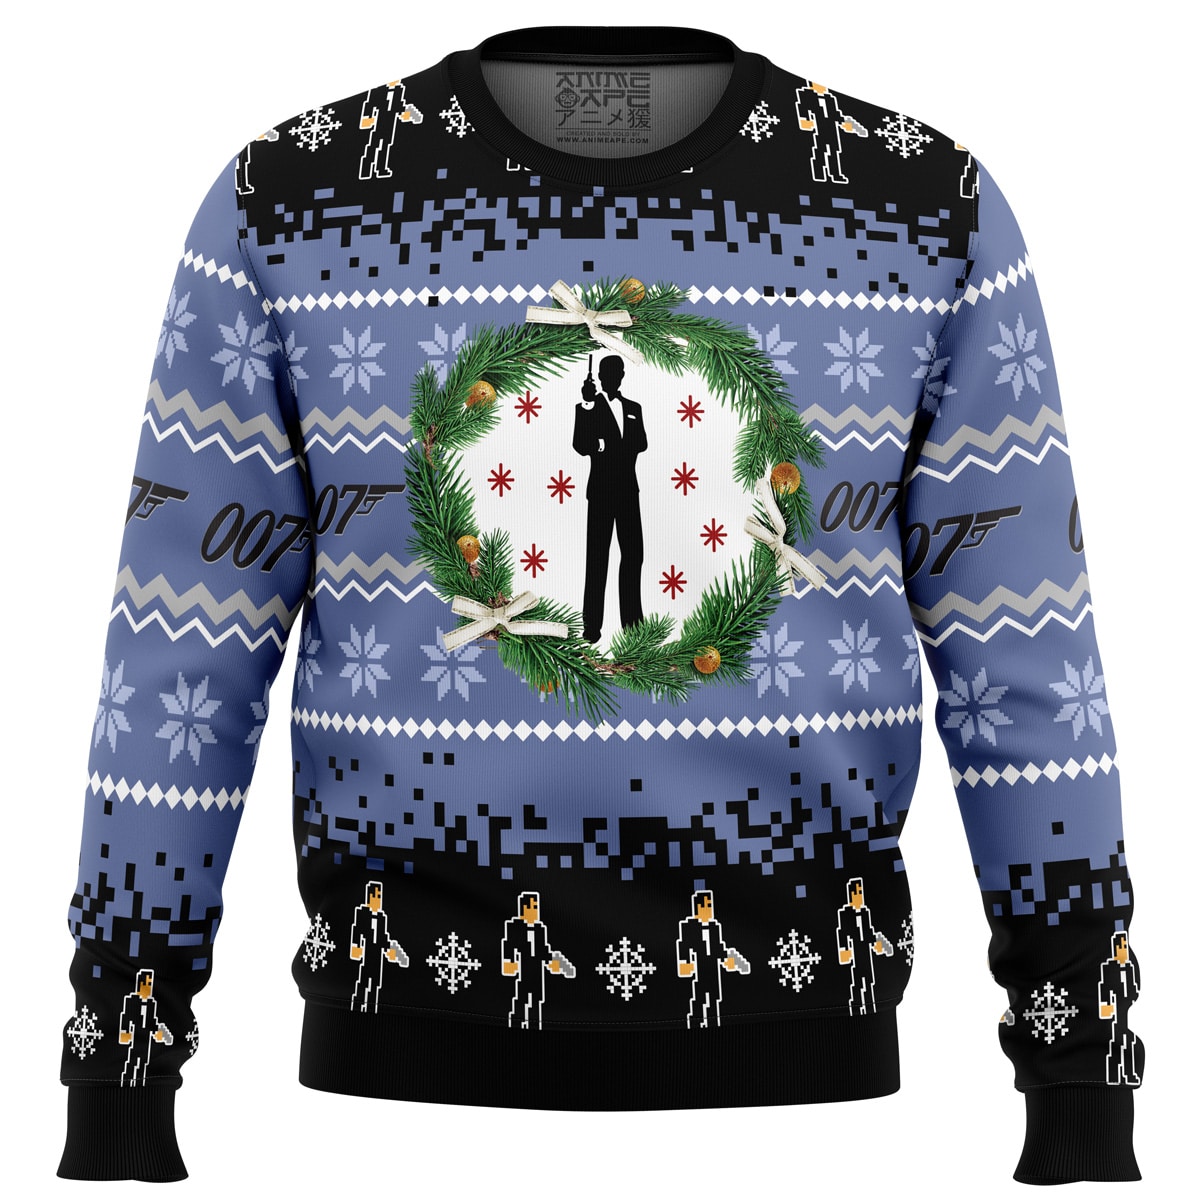 007 James Bond Ugly Christmas Sweater - Chow Down Movie Store